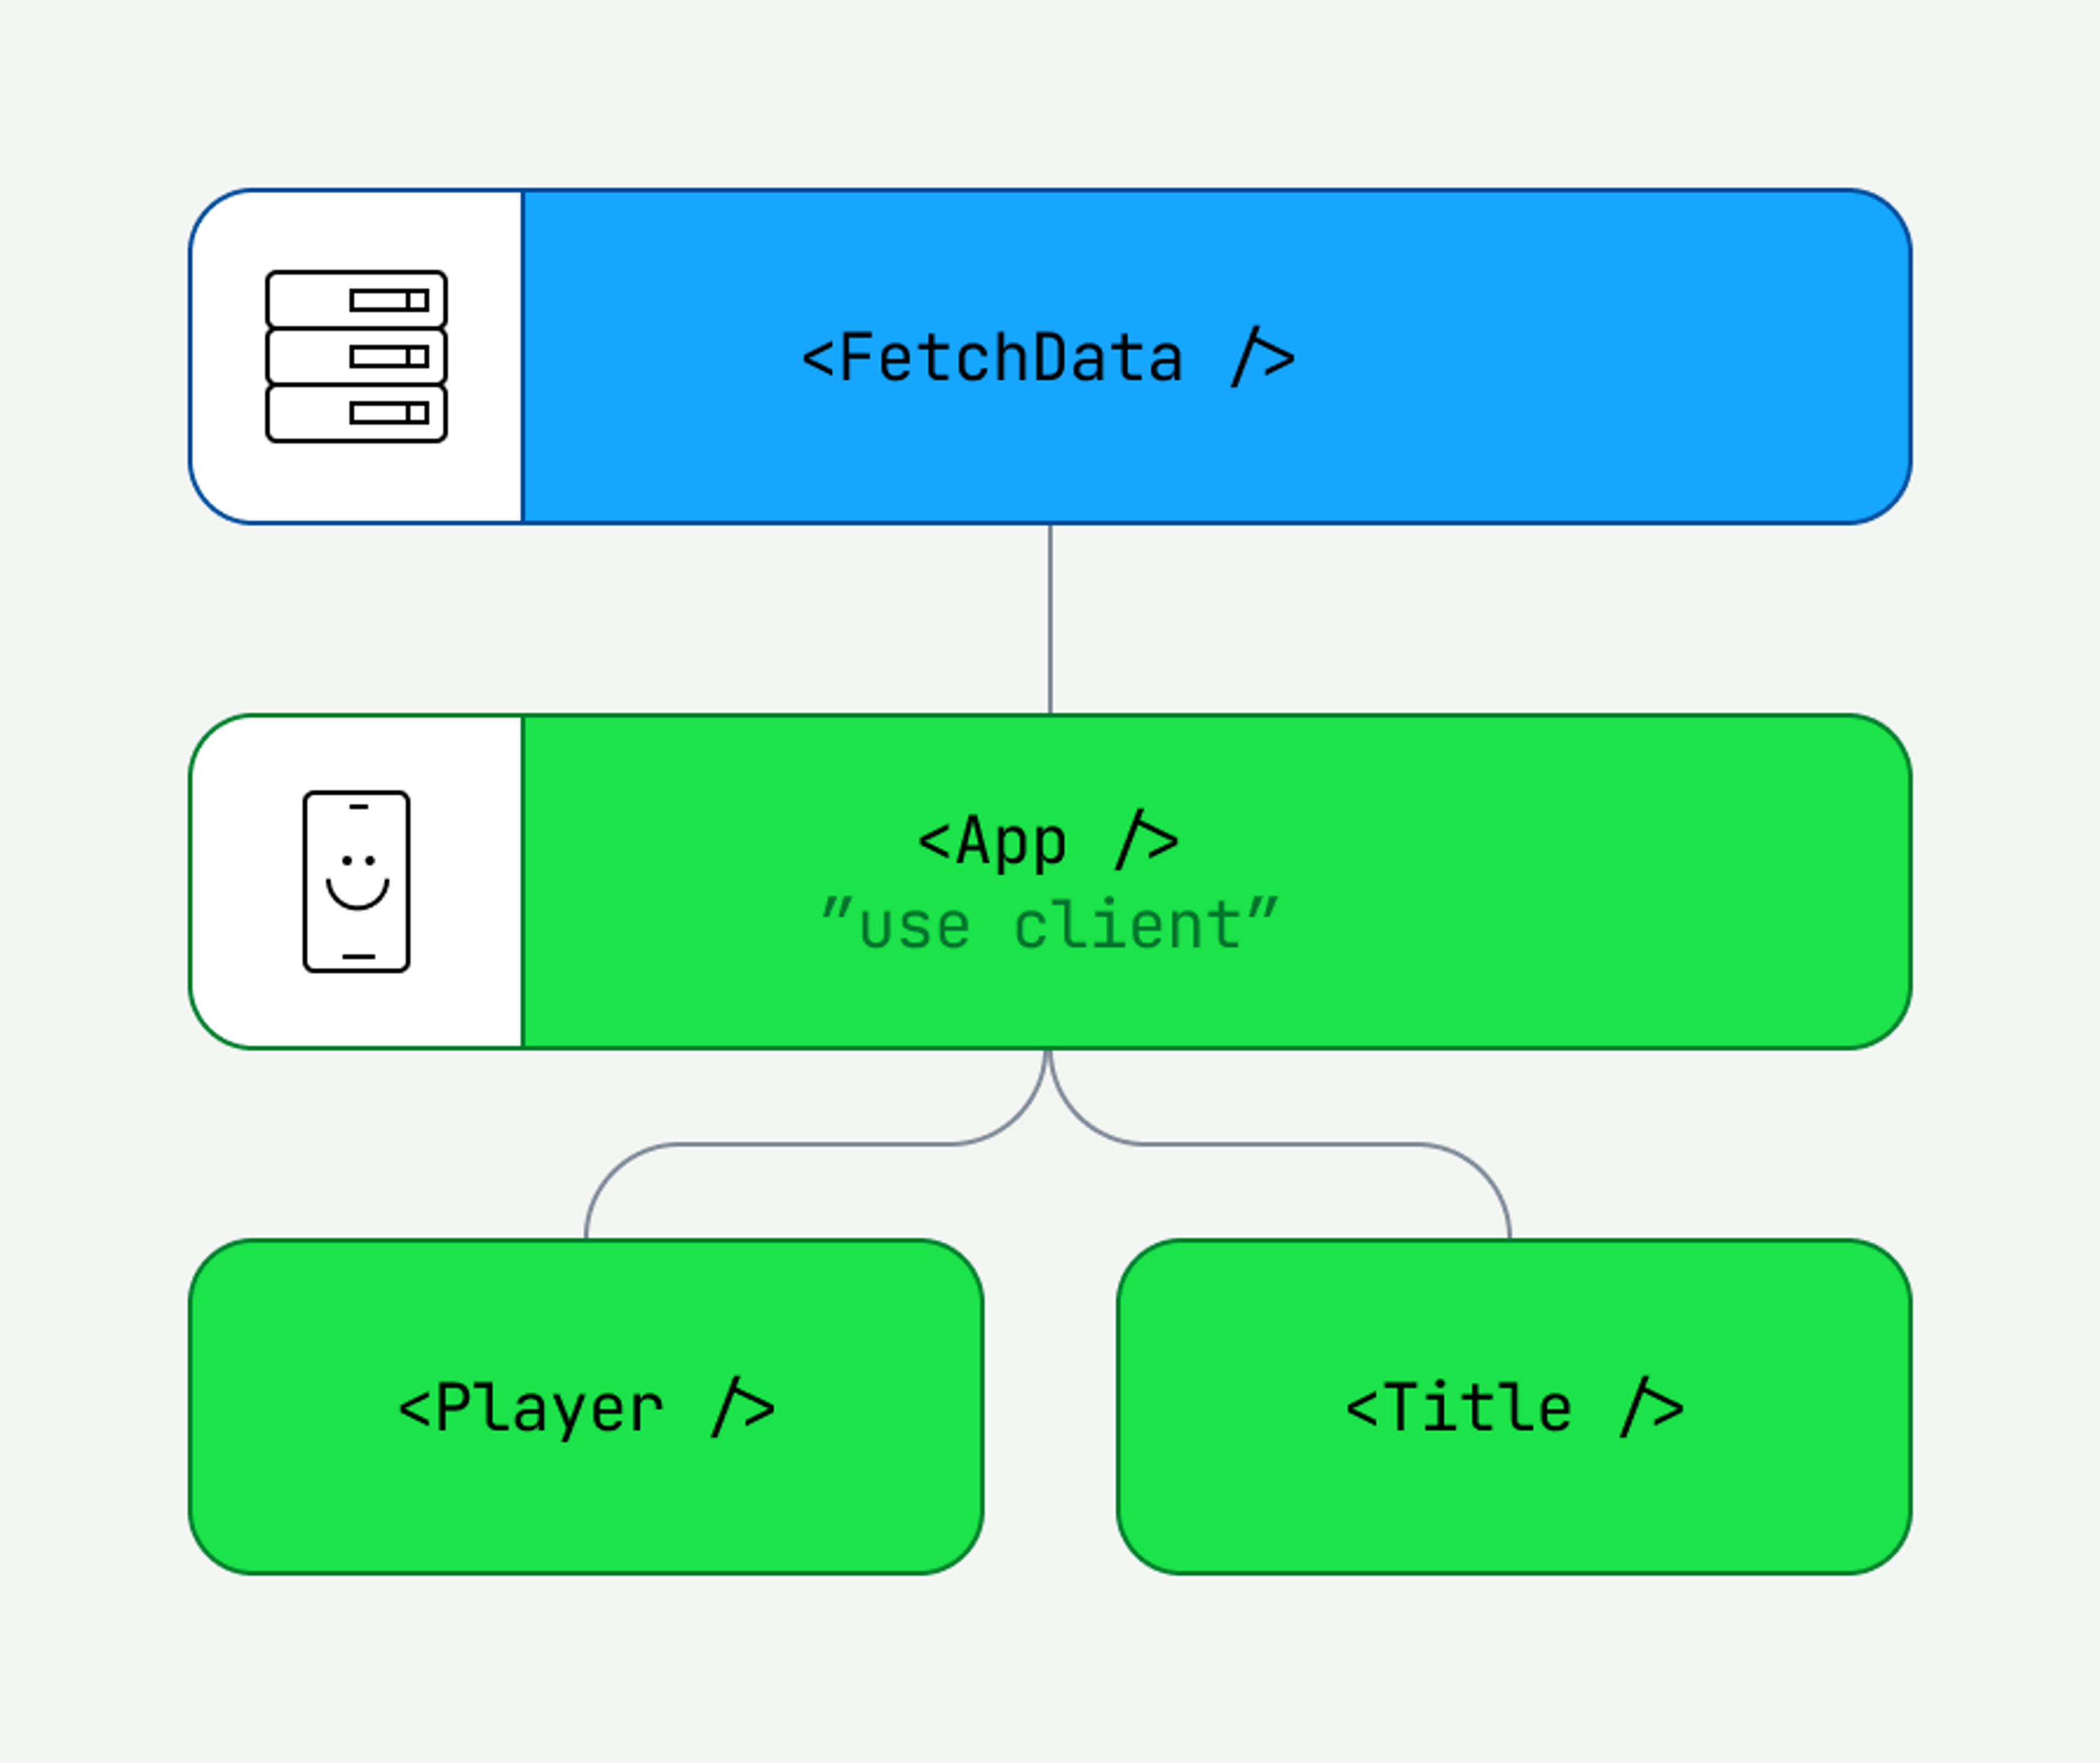 We add a Server Component as a parent of our app so we can fetch data.